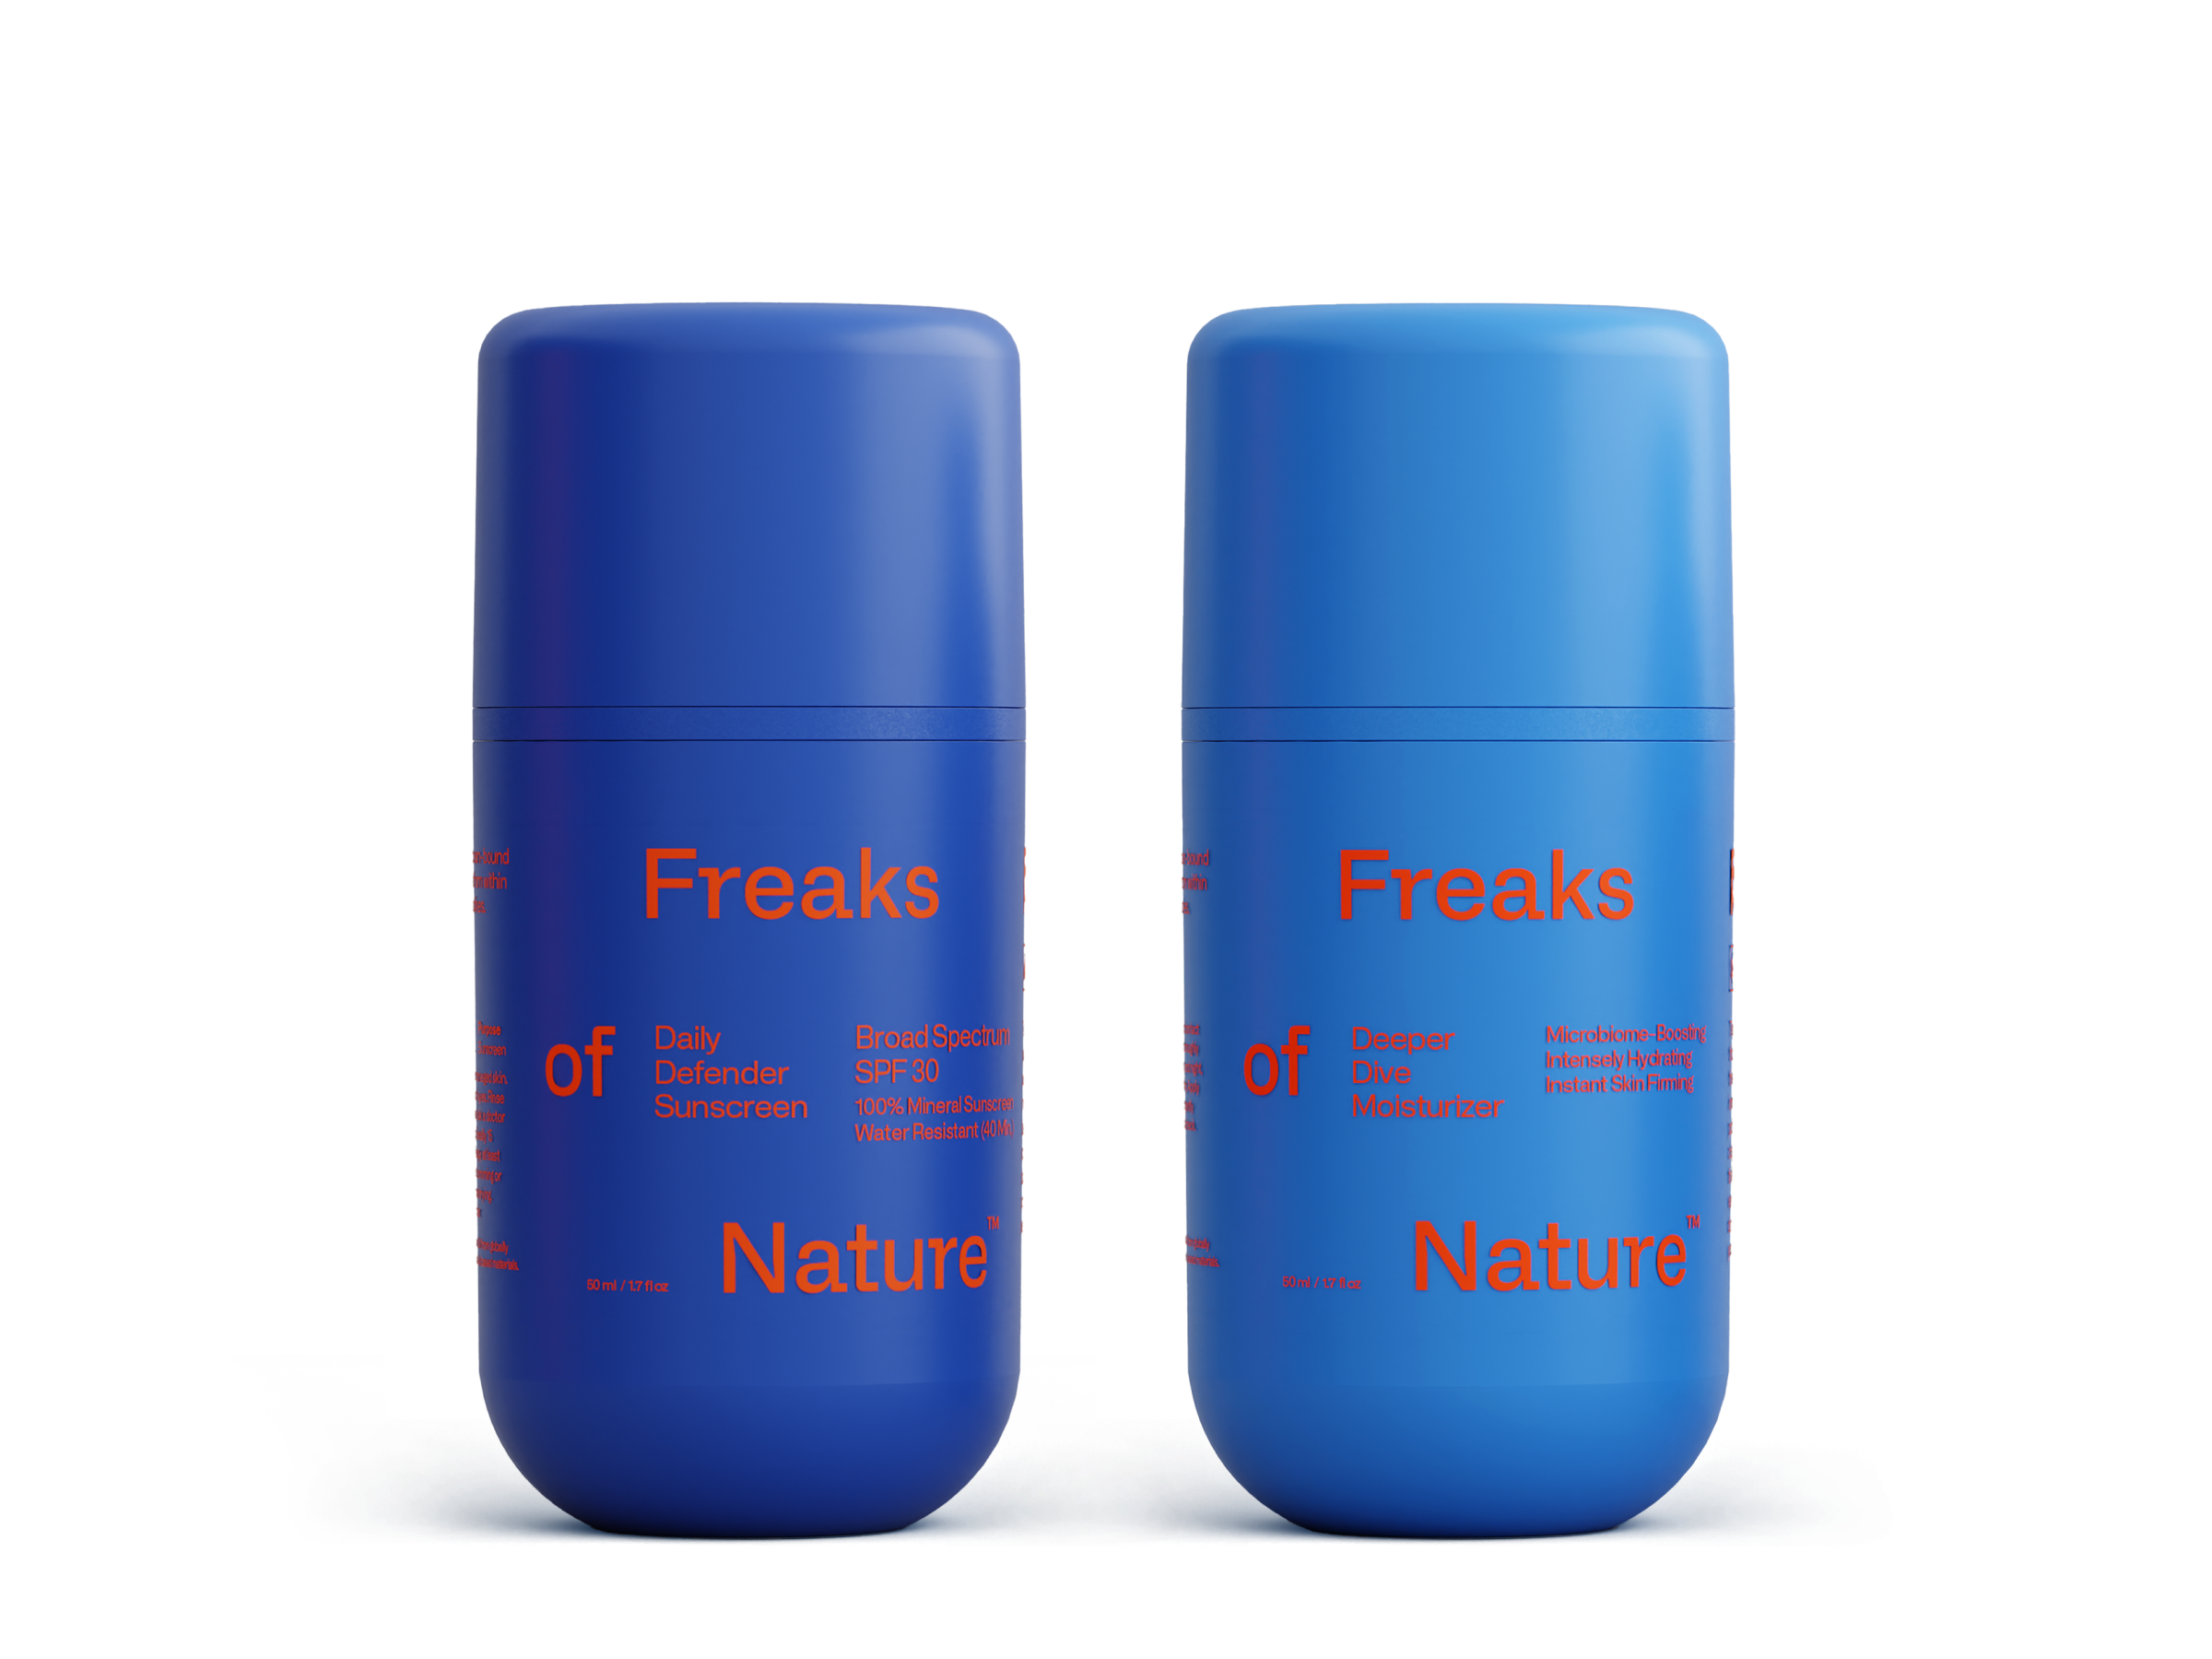 Two blue cylindrical bottles with rounded caps stand side by side. The left bottle, labeled "Daily System," and the right one, labeled "Daily System," feature "Freaks of Nature Skincare" in bold orange text. Each product incorporates vegan Squalane for an eco-friendly touch.